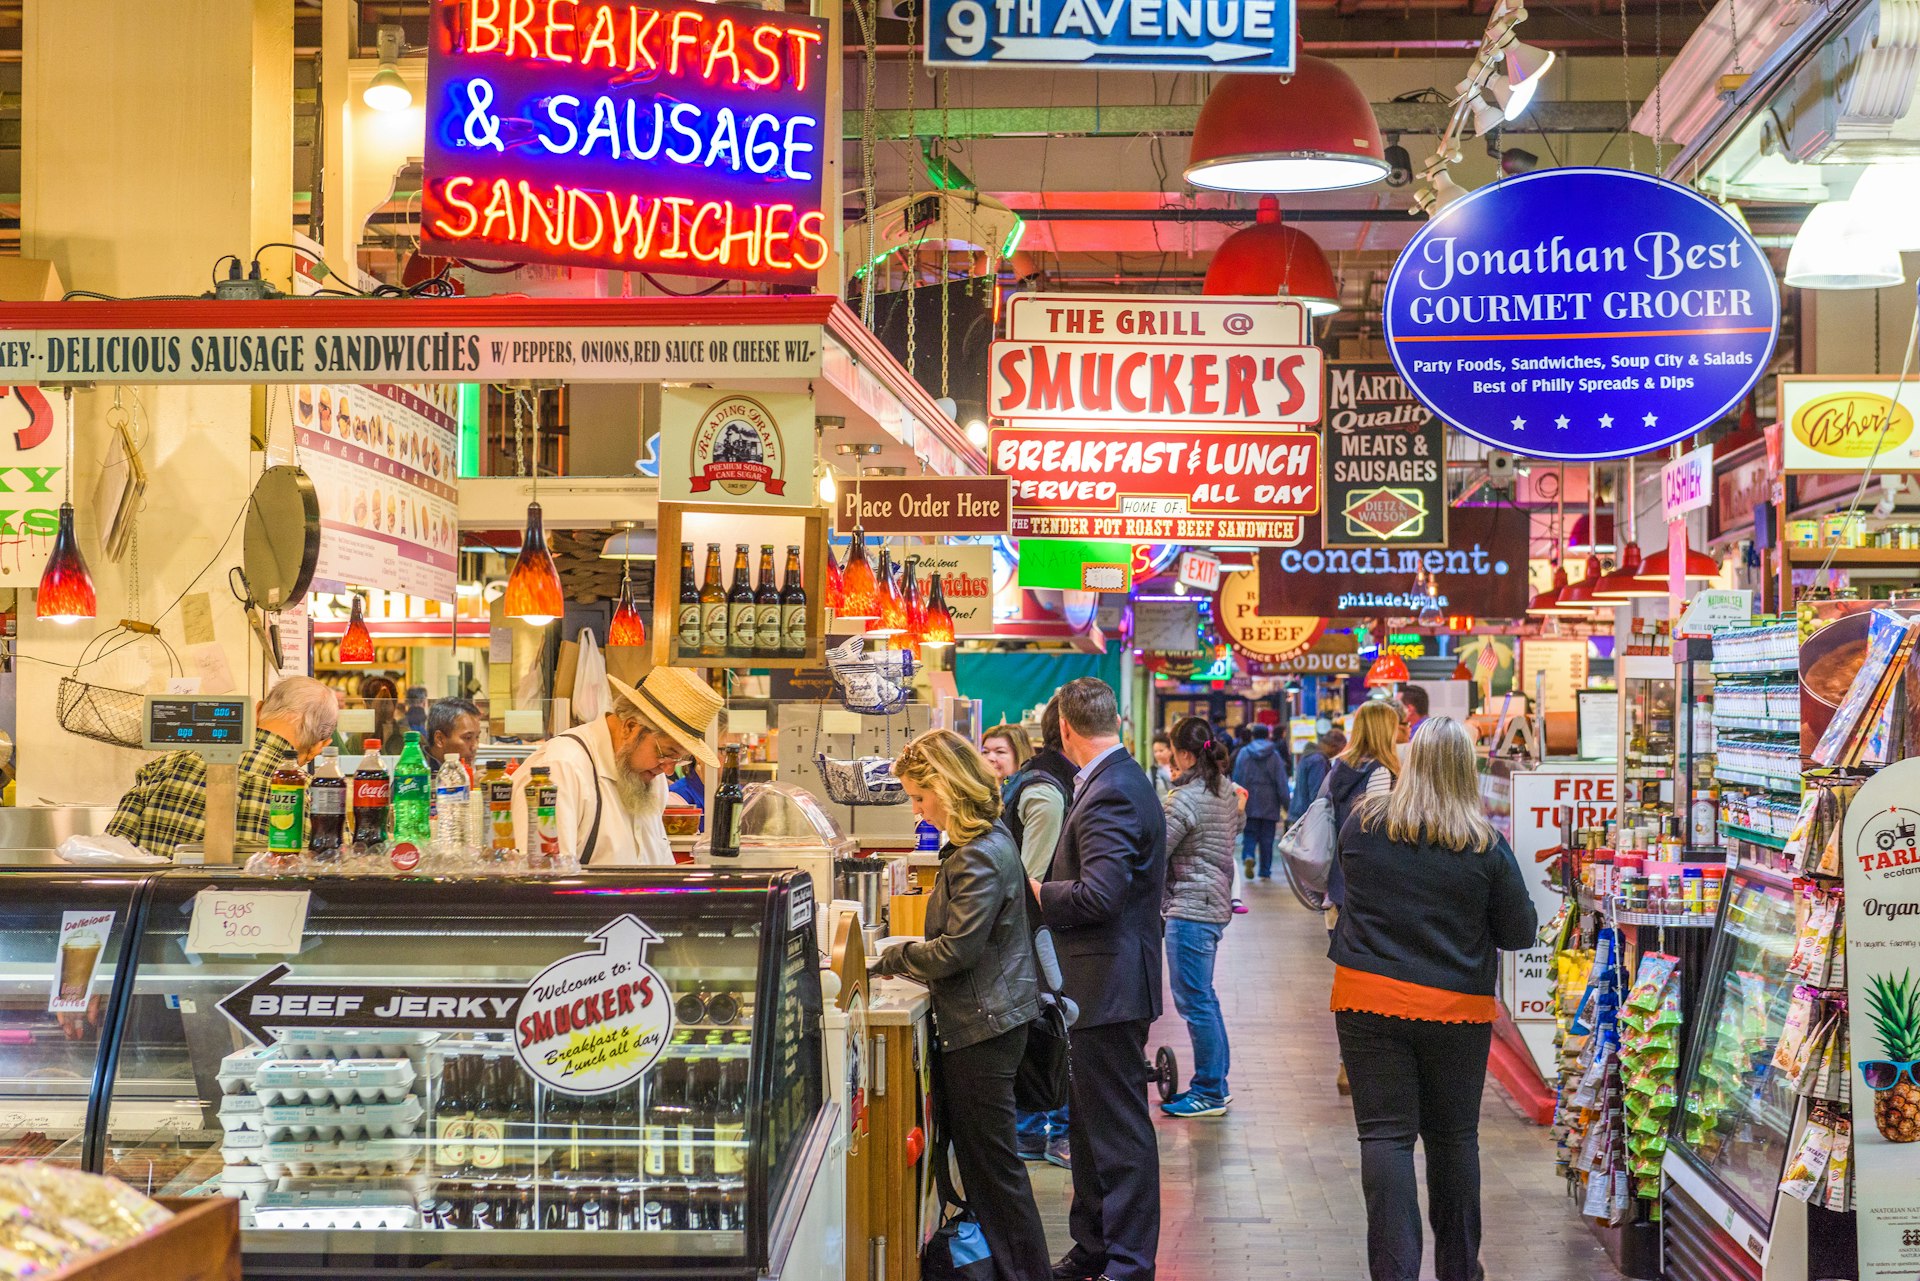 Customers shopping at stalls at the Reading Terminal Market in Philadelphia